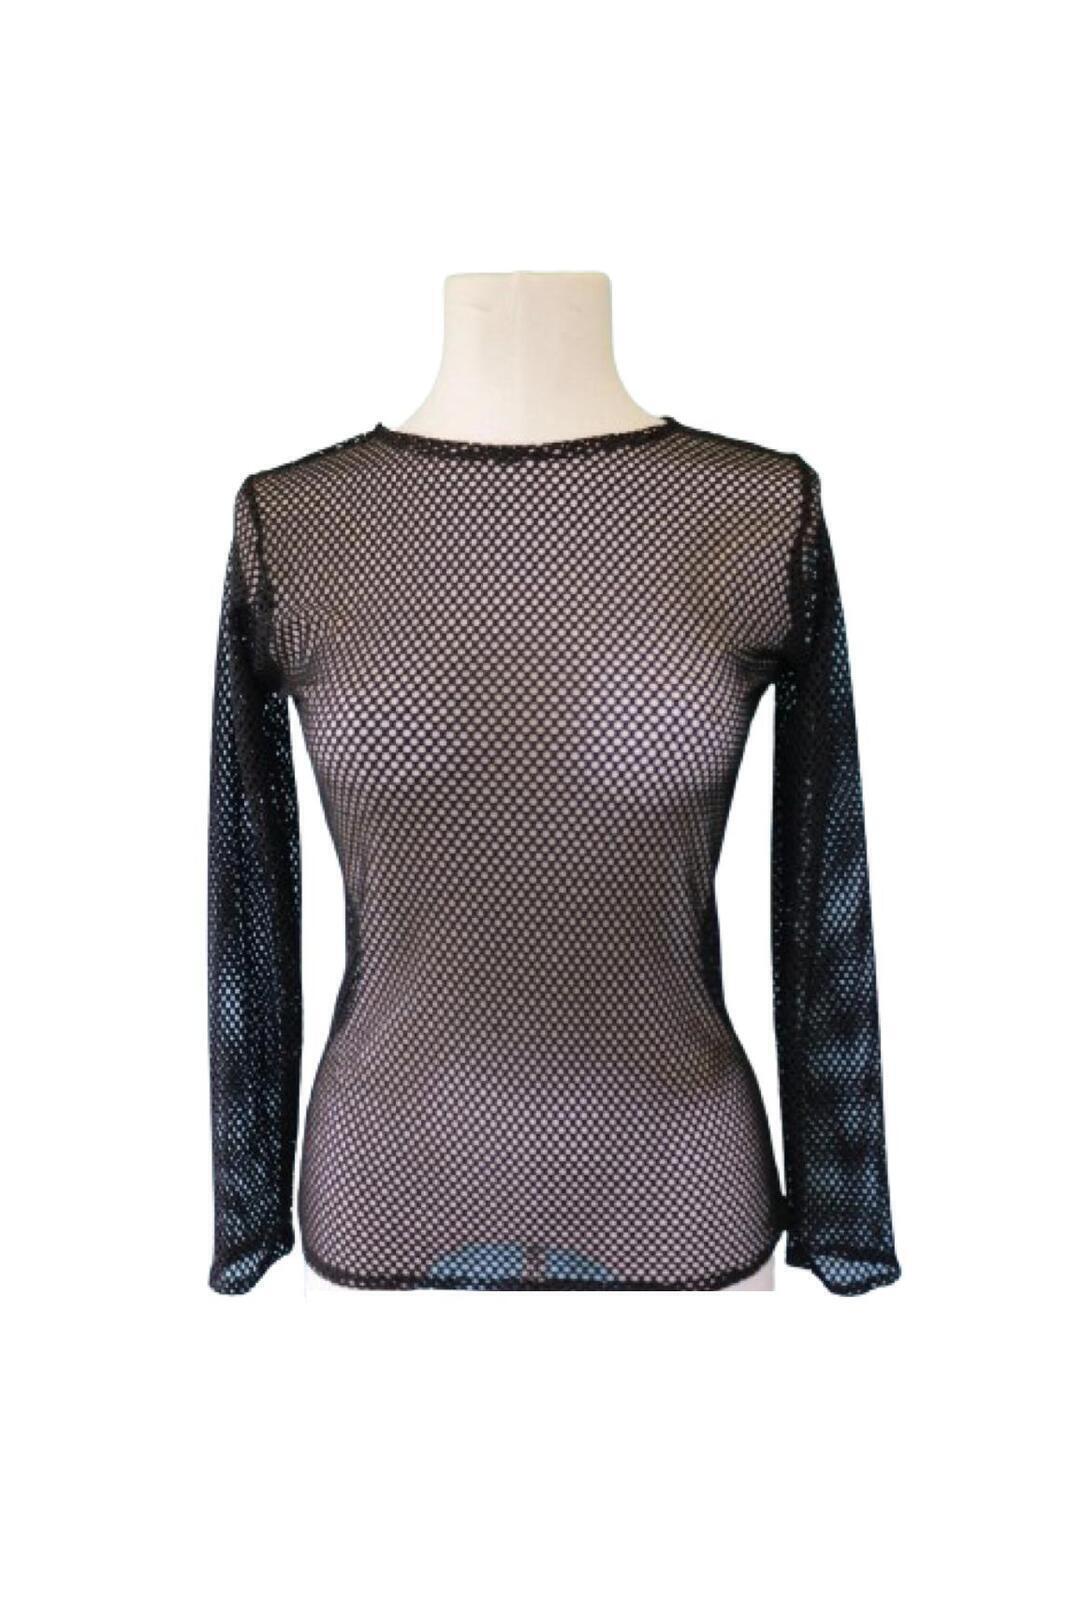 LONG,SLEEVE FISHNET TOP Blouse T Shirt Tee Costume Party See Through